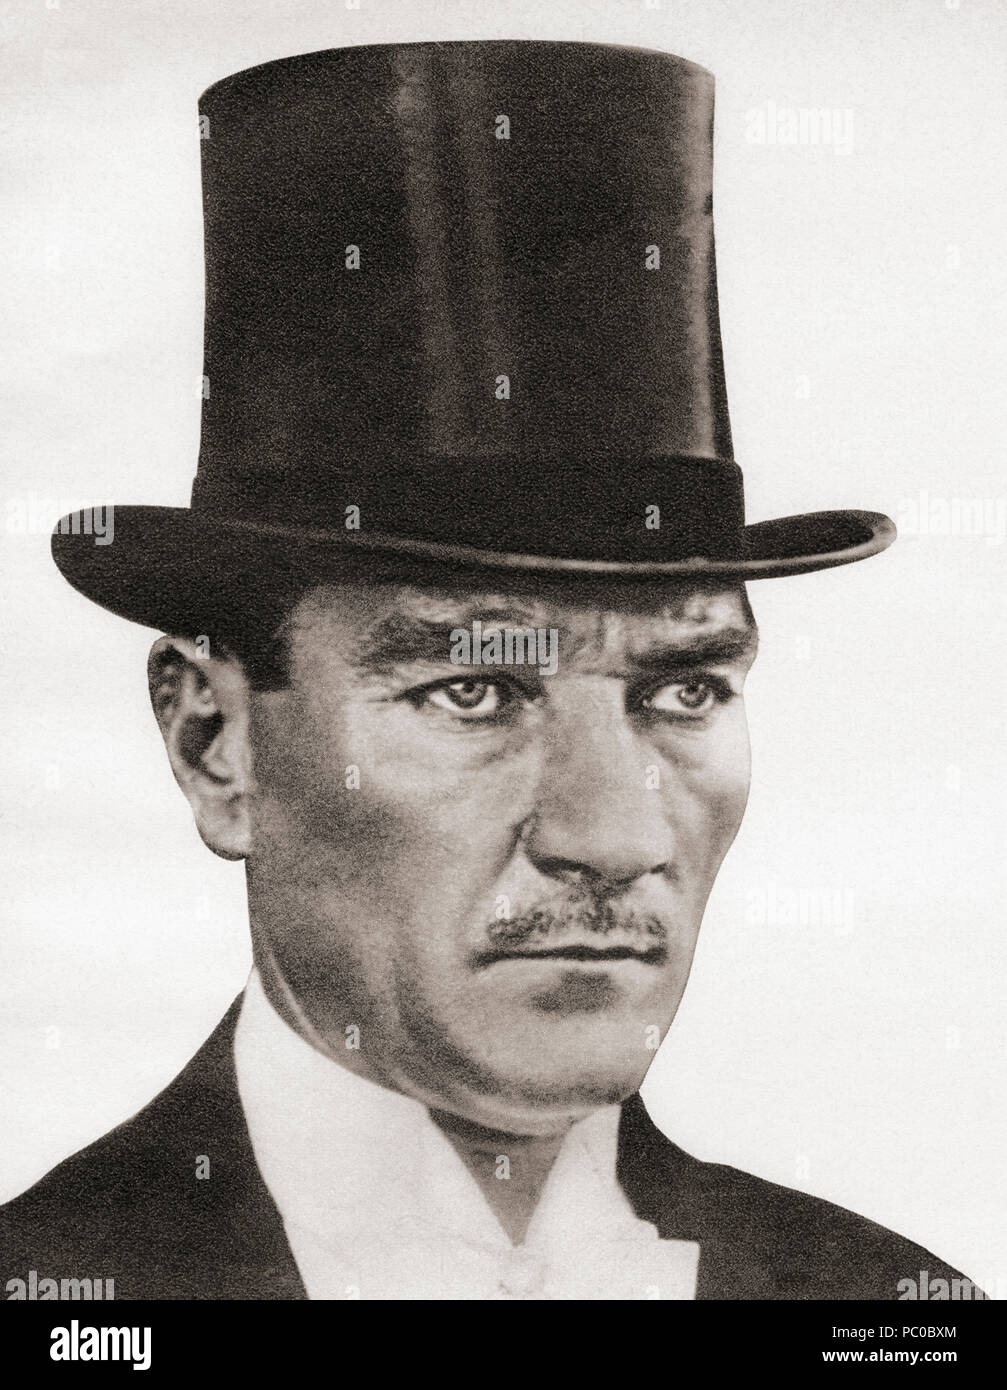 Mustafa Kemal Atatürk, aka Mustapha Kemal Bey, 1881 - 1938. Turkish army officer, revolutionary, founder of the Republic of Turkey and its first president.  From These Tremendous Years, published 1938. Stock Photo